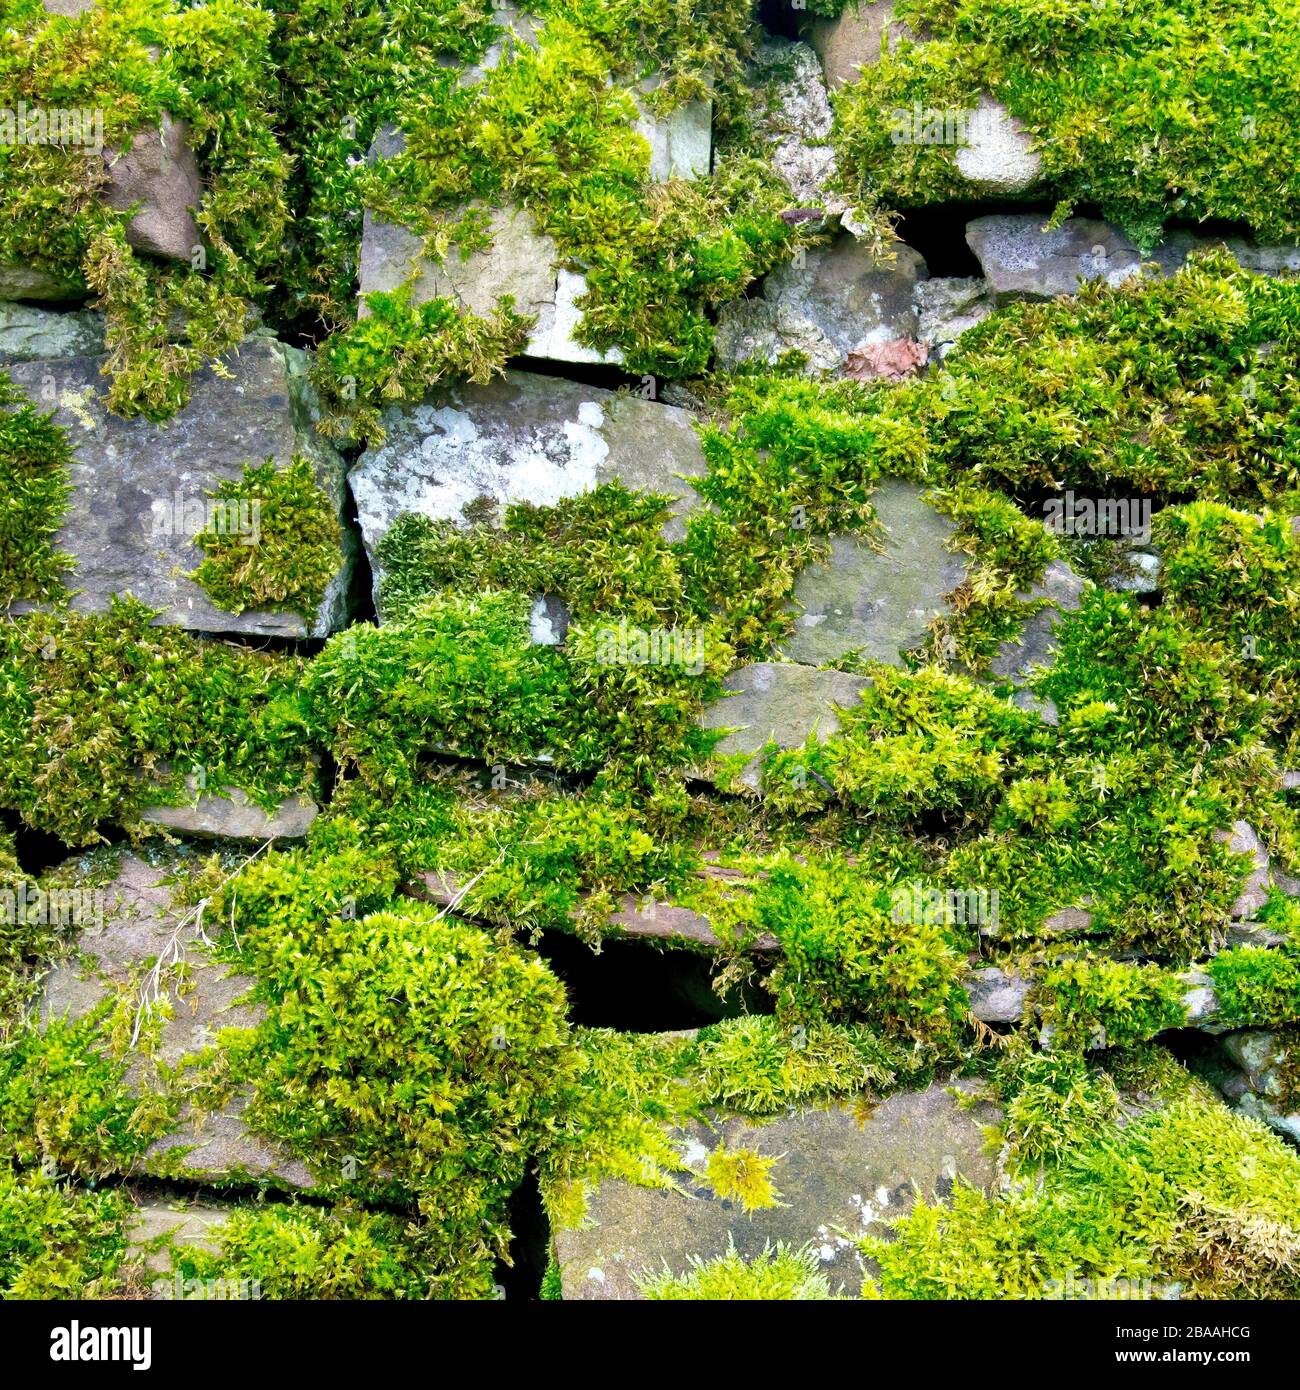 An image of part of an old, slightly tumbledown dry stone wall covered in moss. Stock Photo